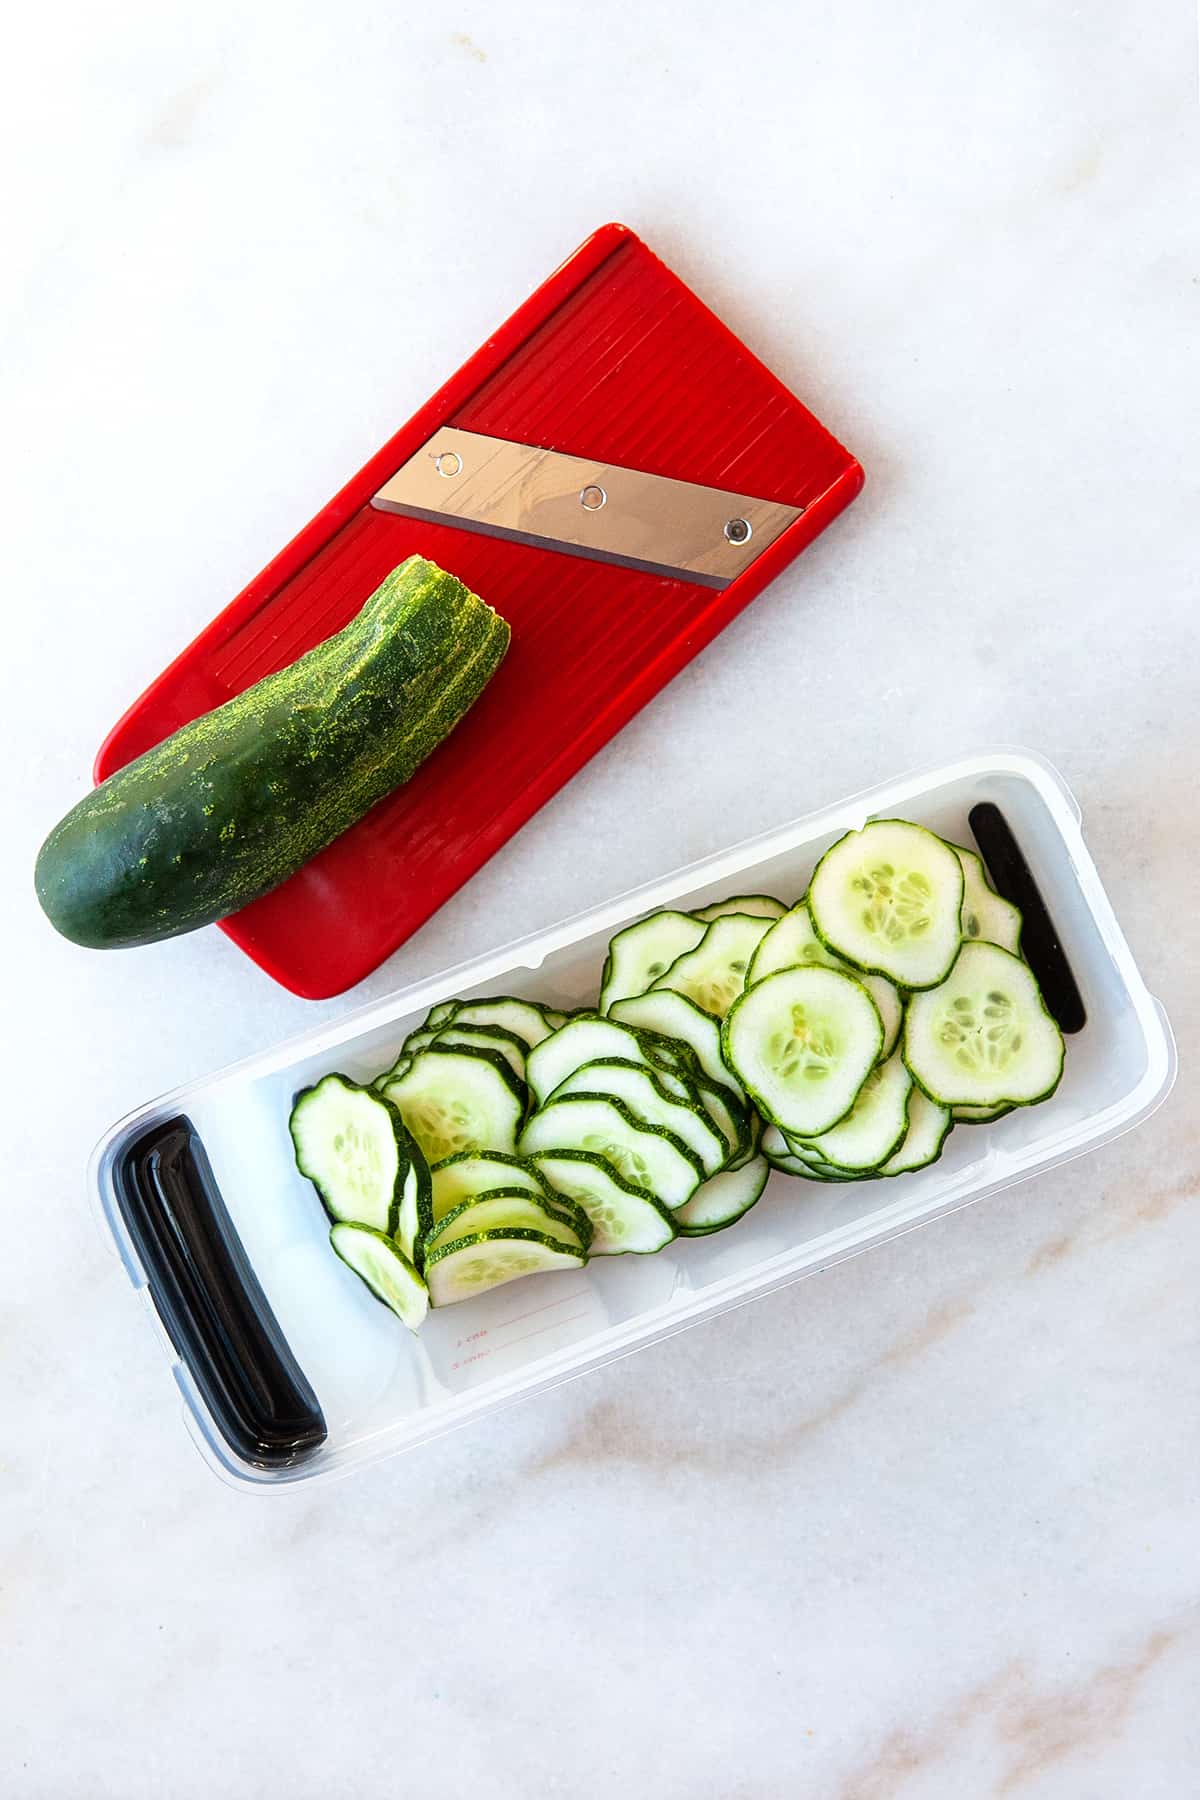 Cucumbers sliced to make Bread and Butter Pickles